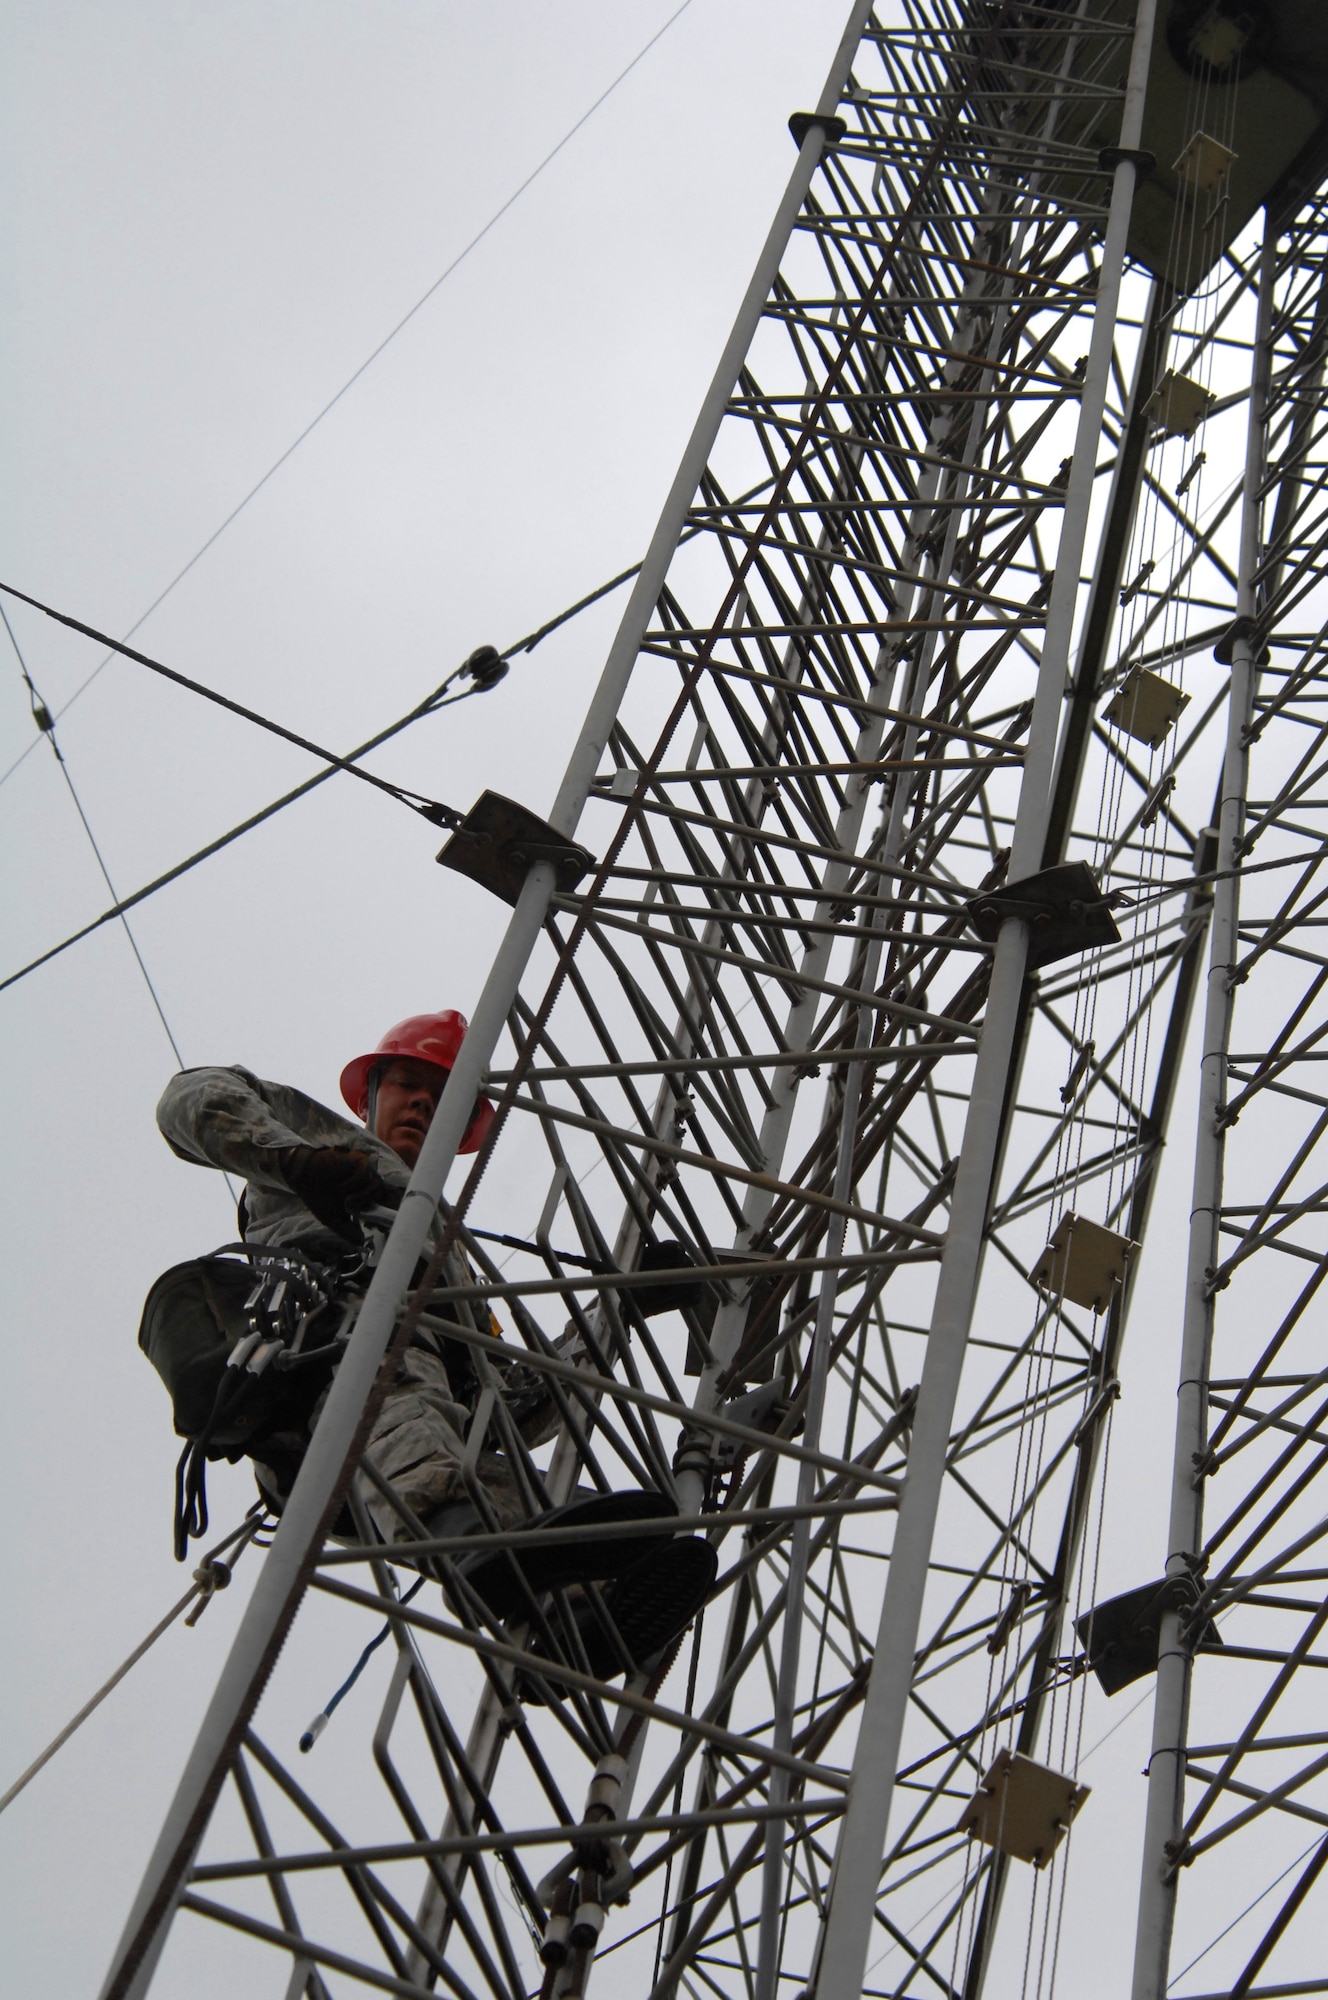 U.S. Air Force Tech. Sgt. Tim Daniel, 1st Communications Maintenance Squadron, performs a preventative maintenance inspection of a radio tower. Sergeant Daniel is a member of the Cable and Antenna Theater Maintenance Team who travel routinely throughout Europe maintaining the communications capability Force across the Atlantic and on into the European Route. (Air Force photo by Tech. Sgt. Michael Voss)